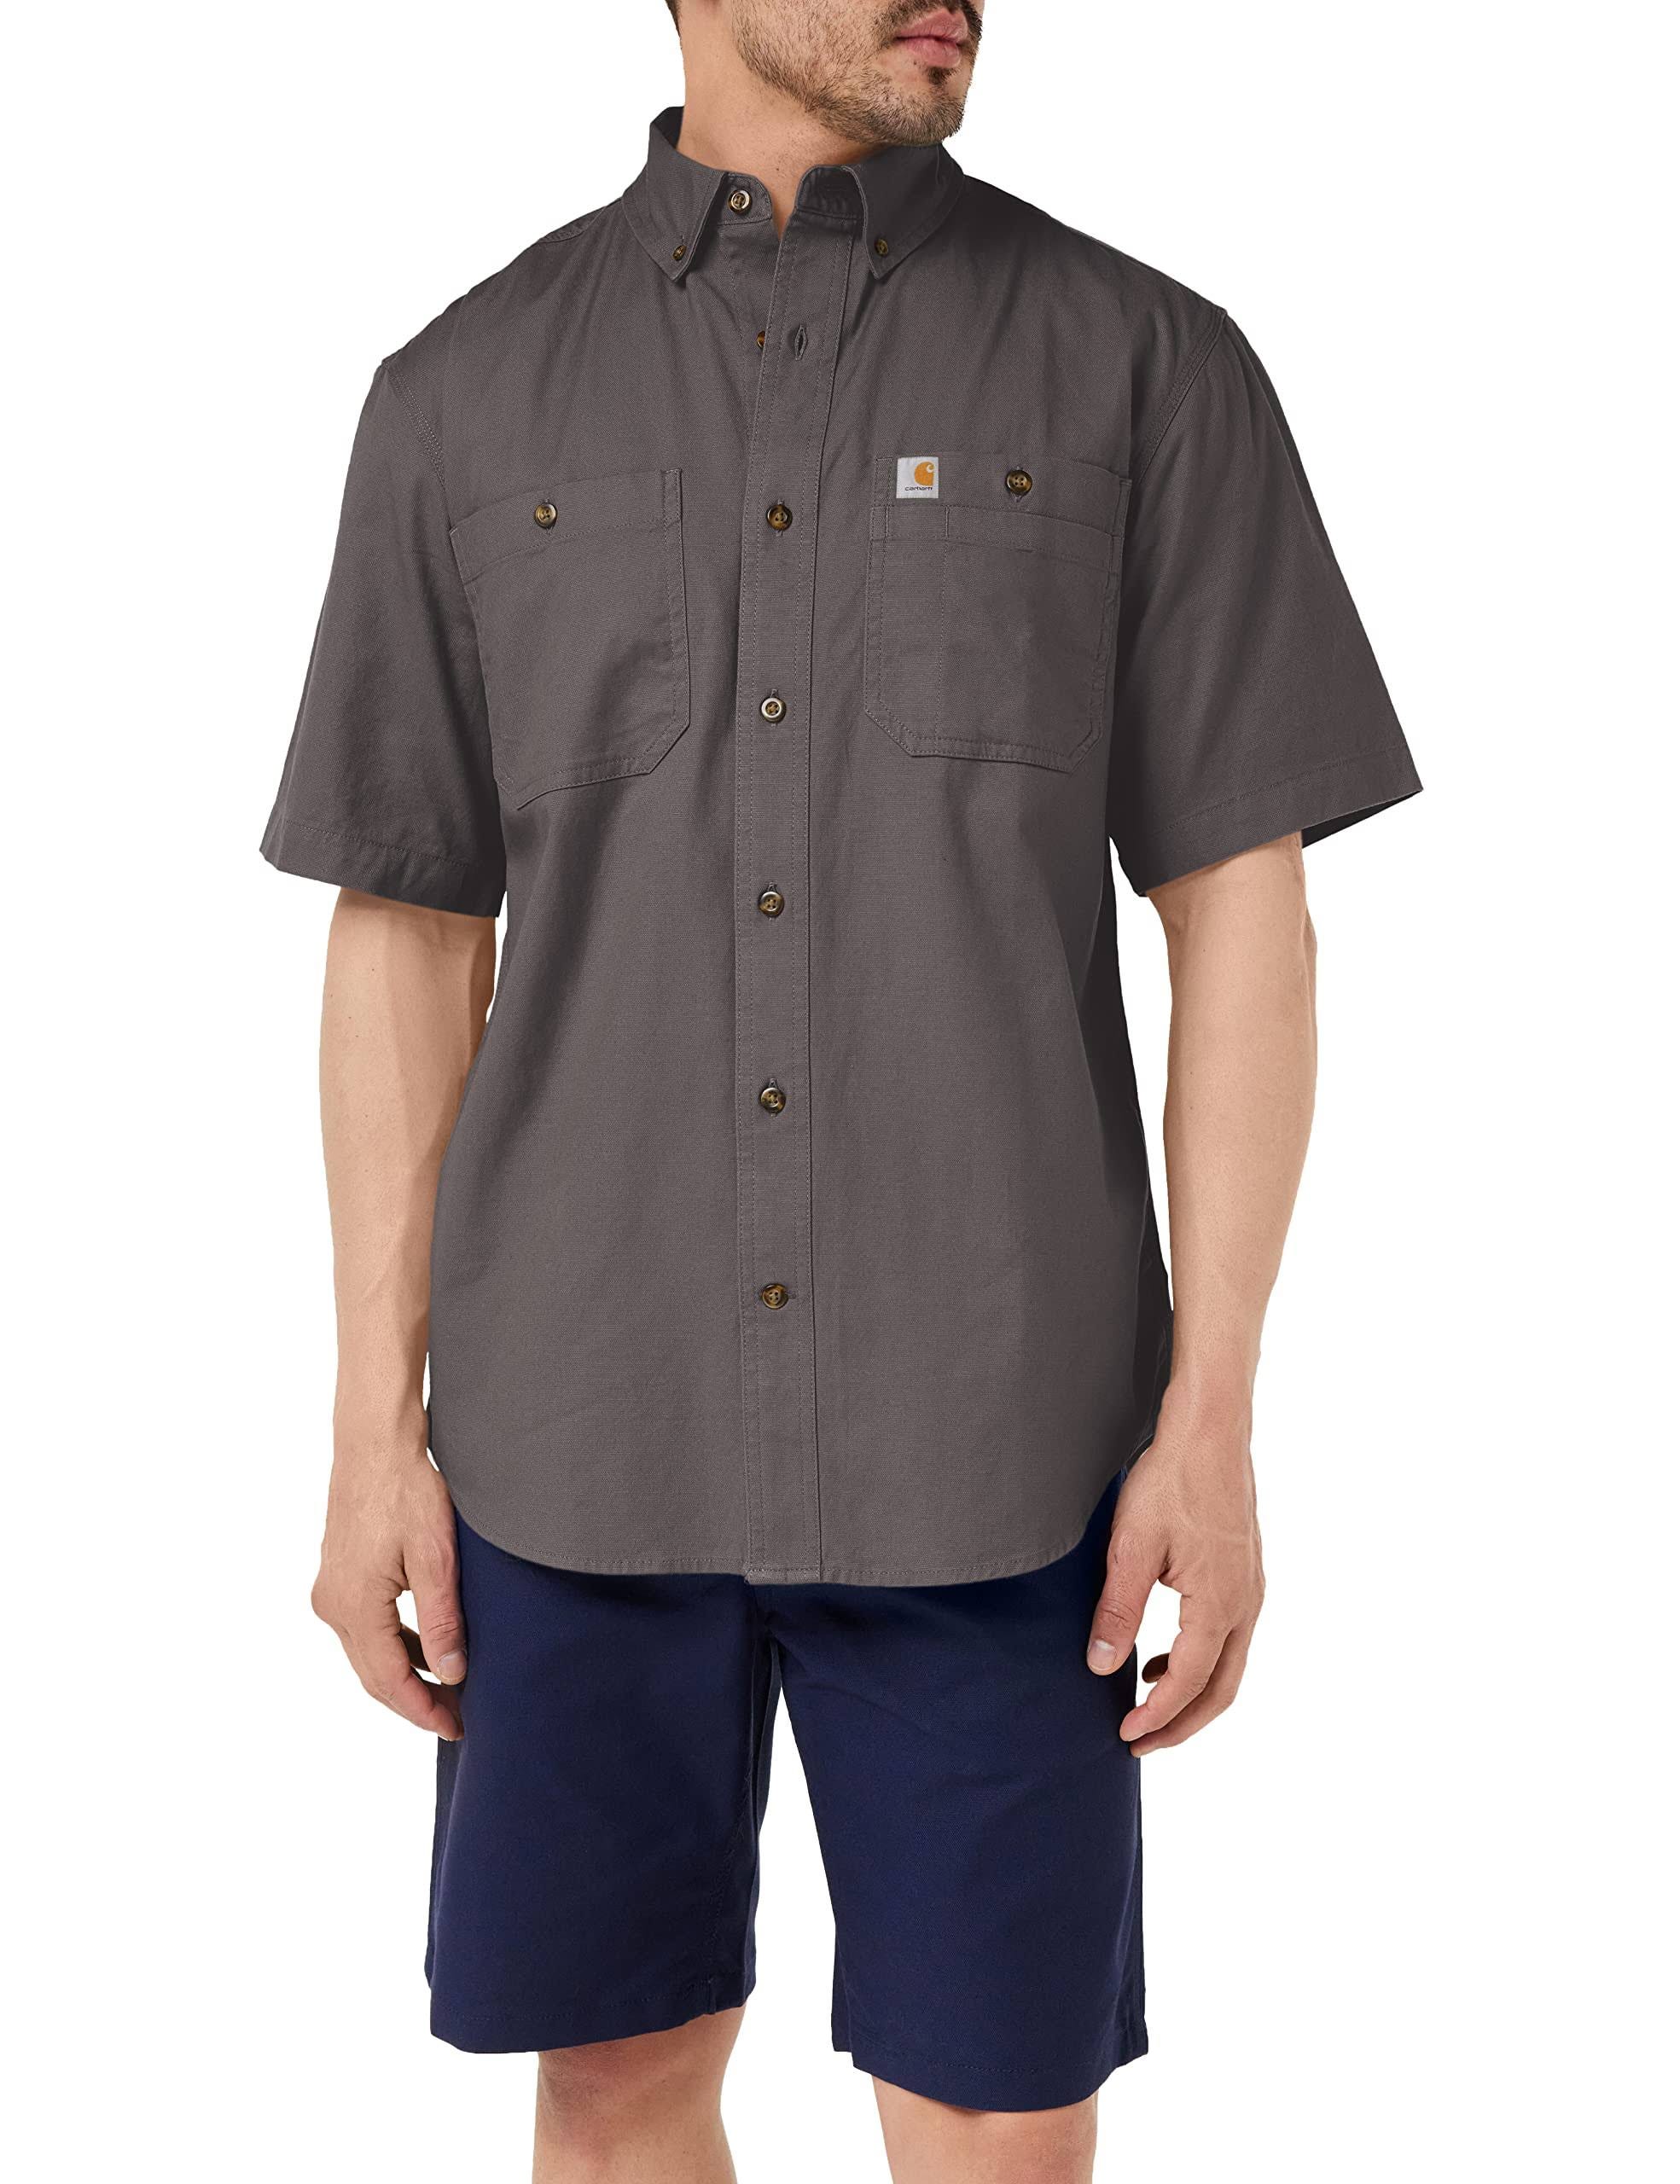 Durable Short Sleeve Work Shirt with Rugged Flex Technology | Image